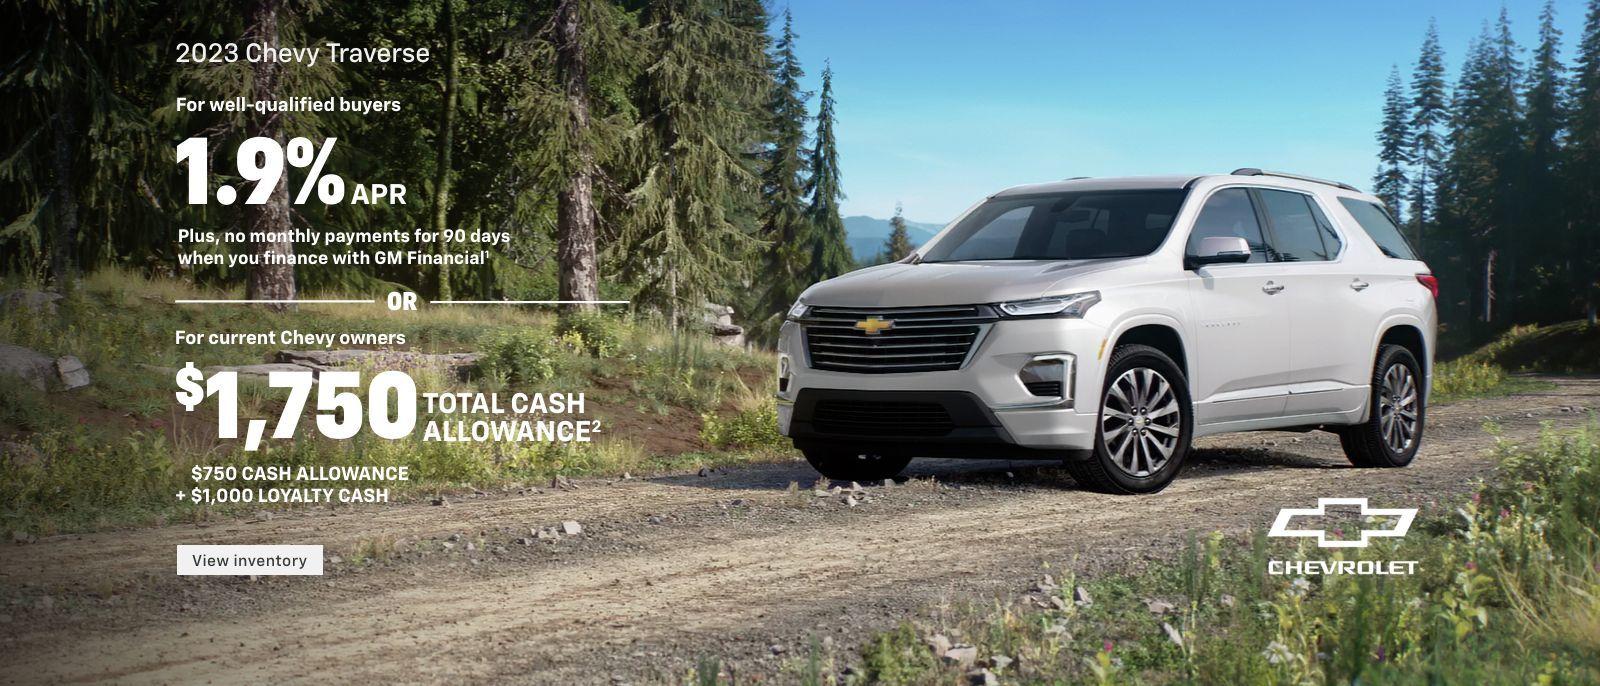 2023 Chevy Traverse. For well-qualified buyers 1.9% APR + no monthly payments for 90 days when you finance with GM Financial. Or, for current Chevy owners $1,750 total cash allowance. $1,000 loyalty cash + $750 cash allowance.